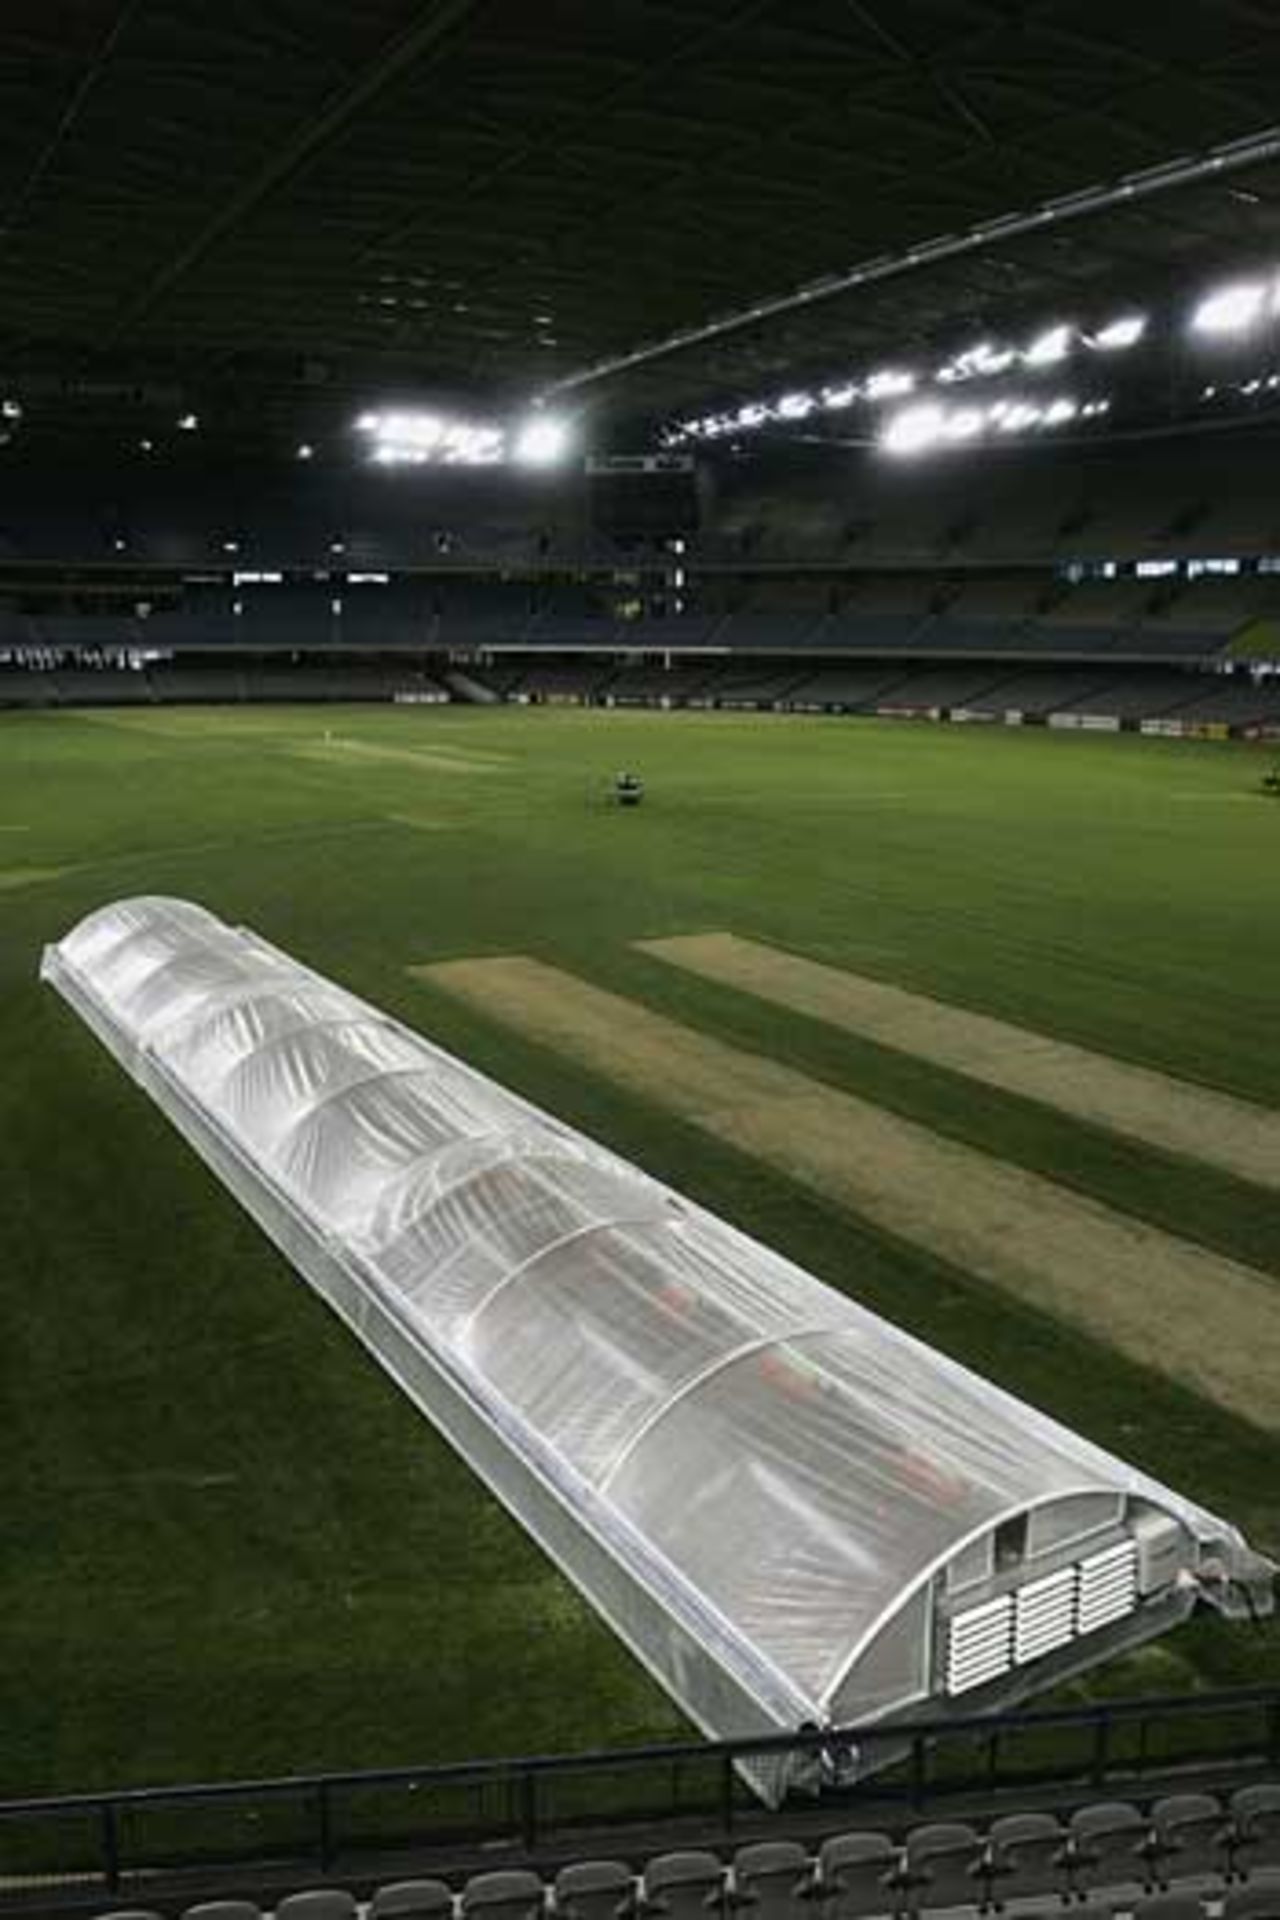 General view of the Telstra Dome with the Perennial climate control system that protects the drop-in pitches, Melbourne, September 28, 2005